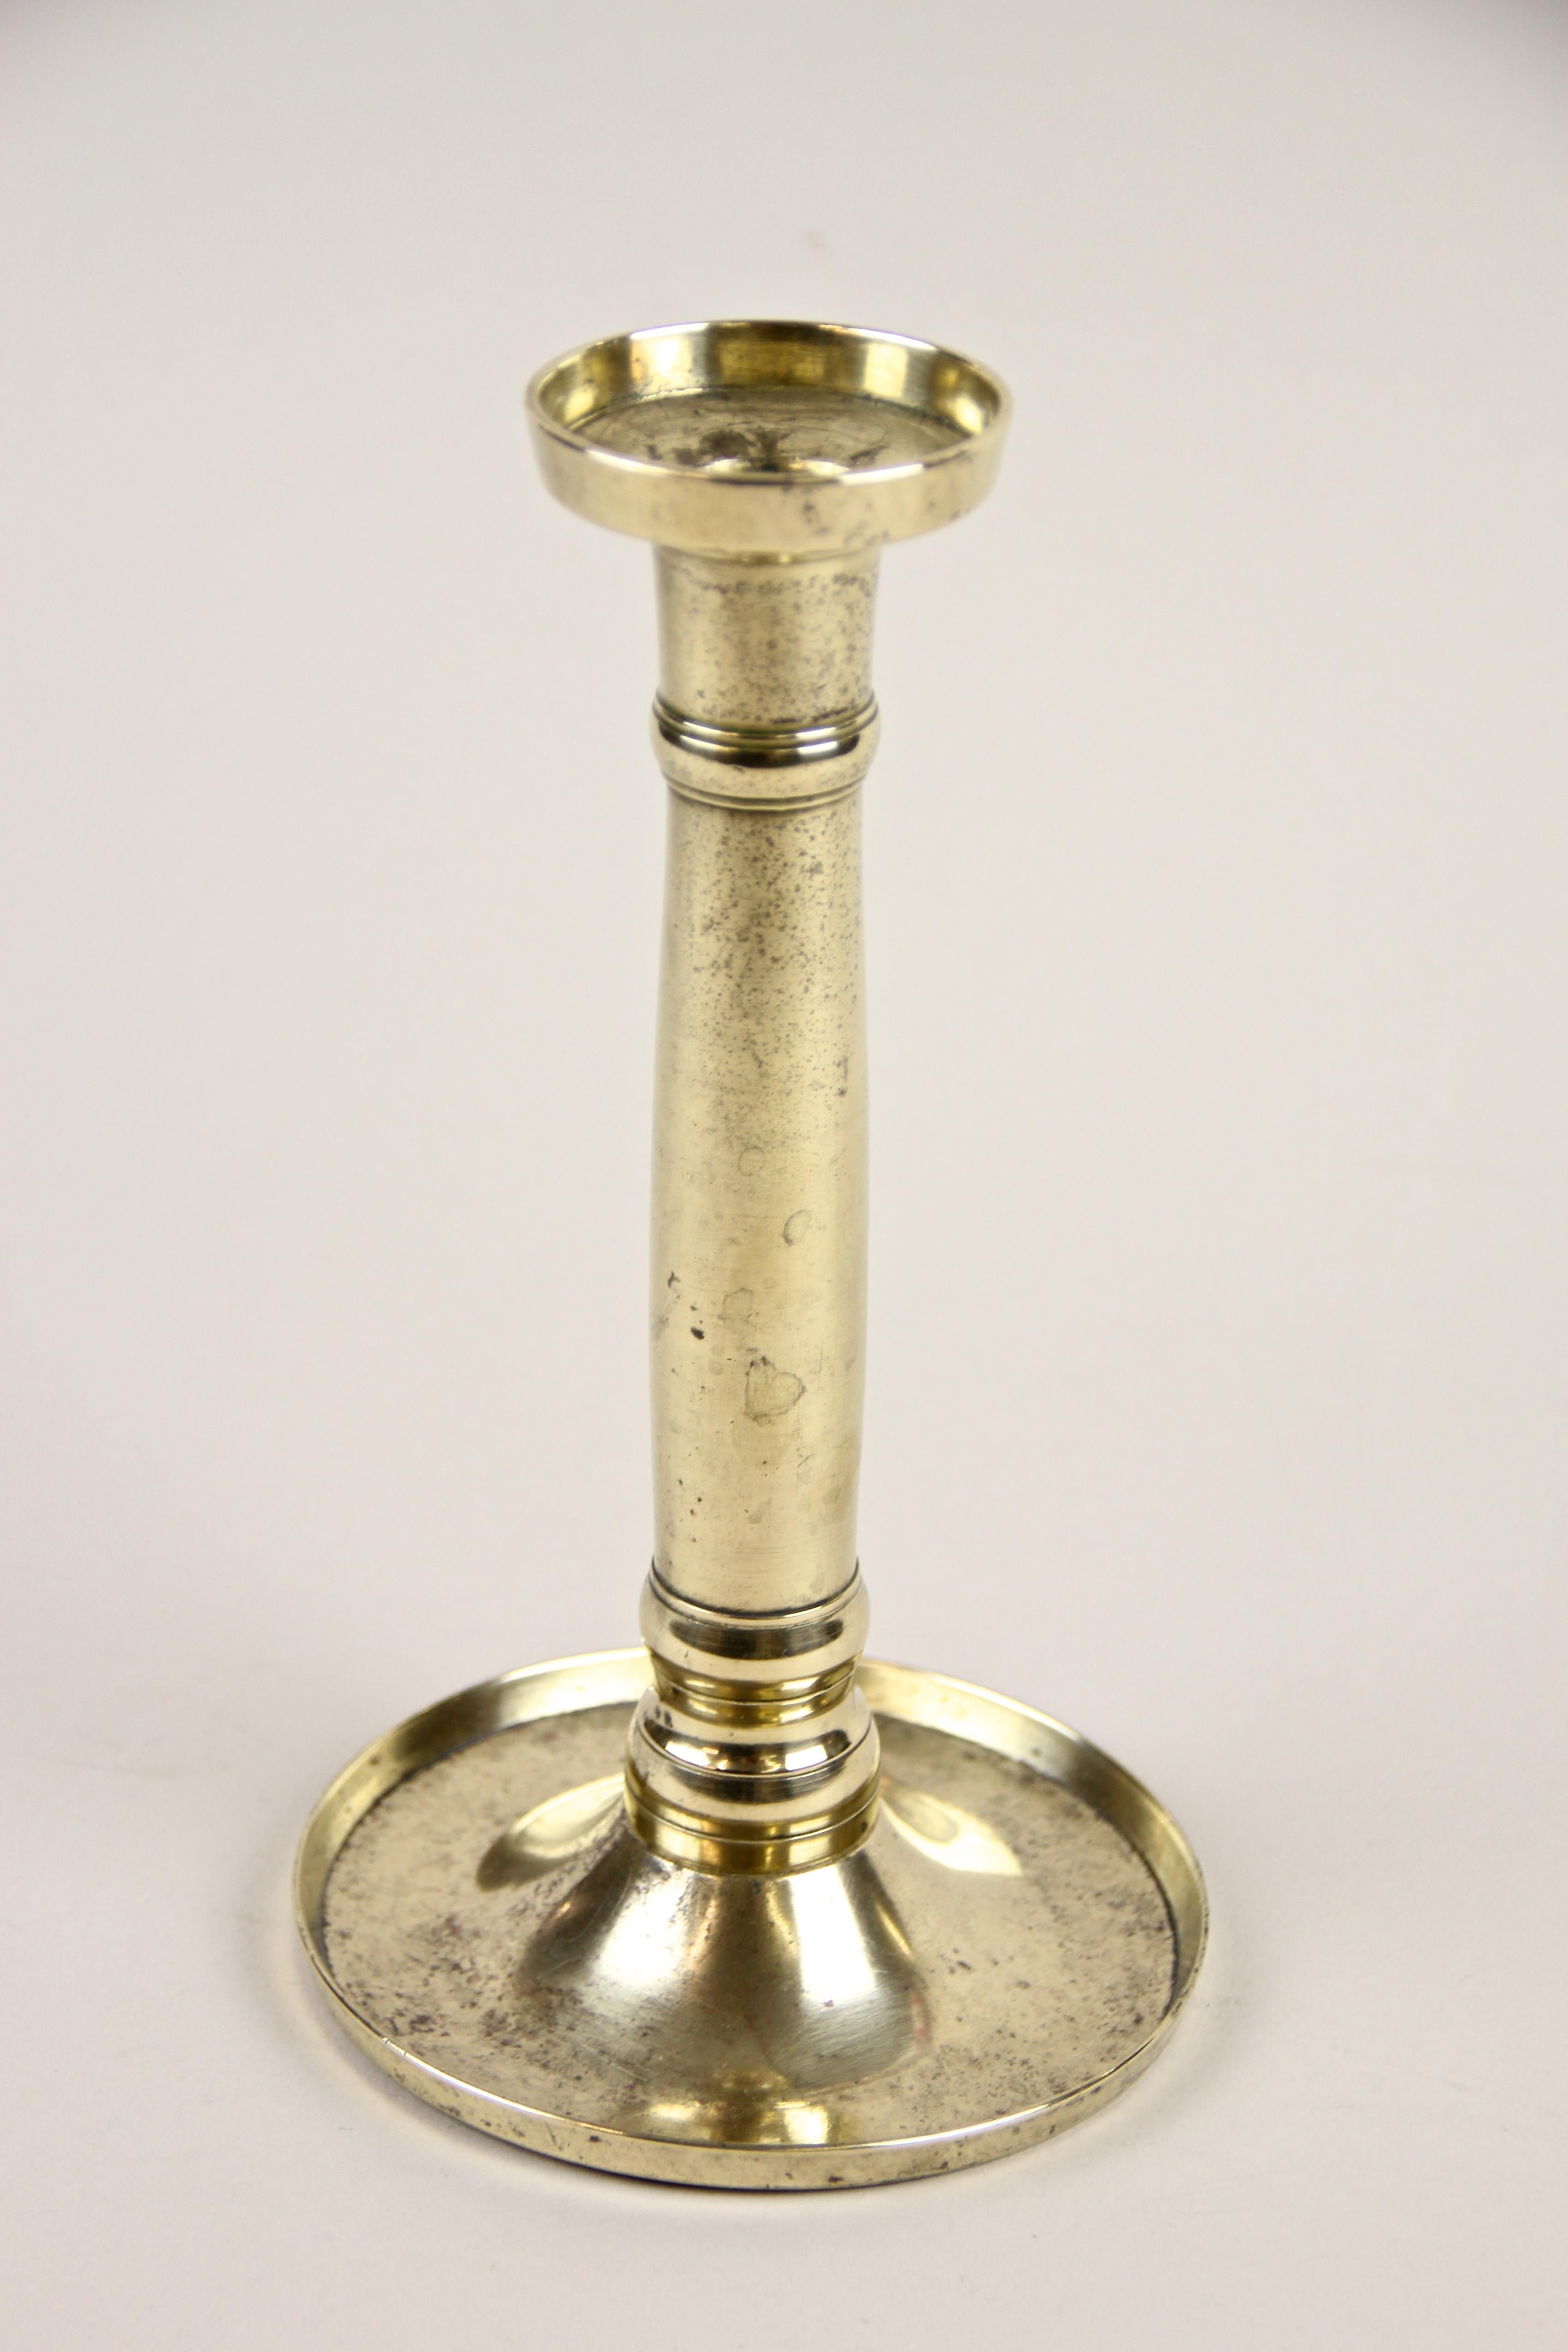 Fine 19th century Biedermeier brass candlesticks from Austria, circa 1830. A straight, clear shape, a typical attribute for the early Biedermeier period, processed of fine brass with lovely details, makes this antique candlestick a very decorative